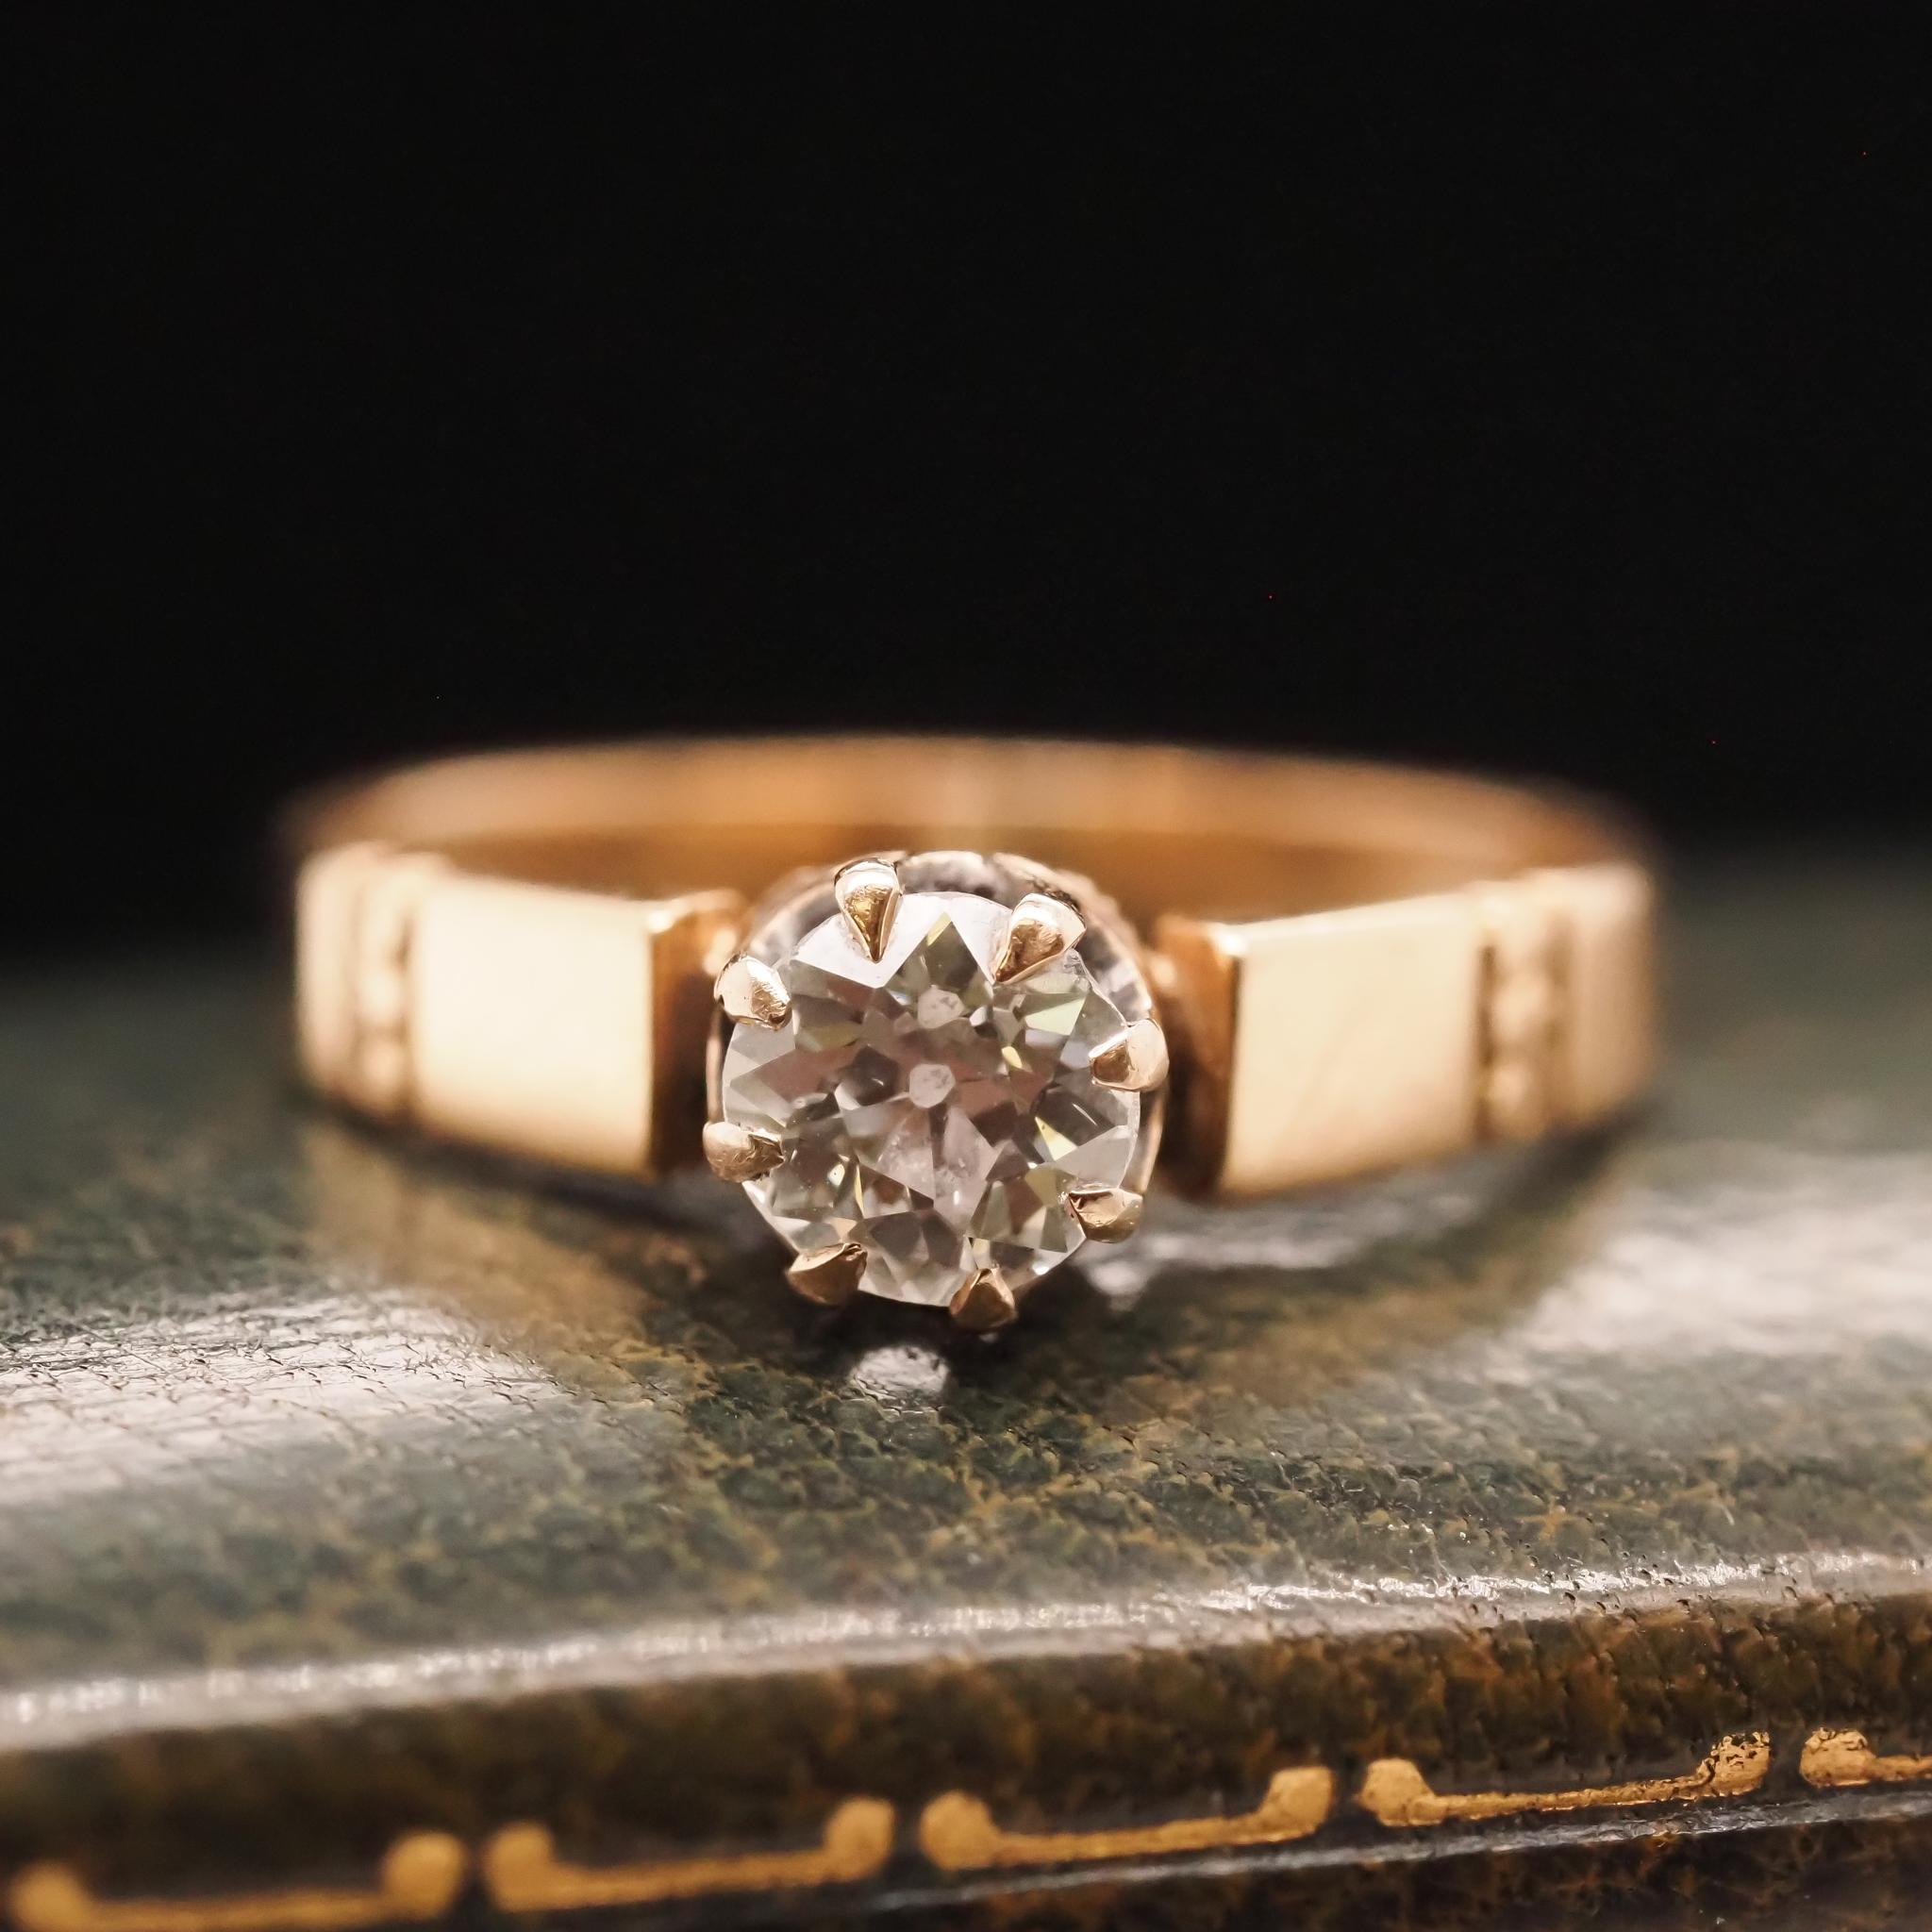 Year: 1900s
Item Details:
Ring Size: 6.5 (Sizable)
Metal Type: 18K Yellow Gold [Hallmarked, and Tested]
Weight: 2.9grams
Diamond Details: .60ct, Old European Brilliant, F Color, VS Clarity, Natural Diamond
Band Width: 2mm
Condition: Excellent